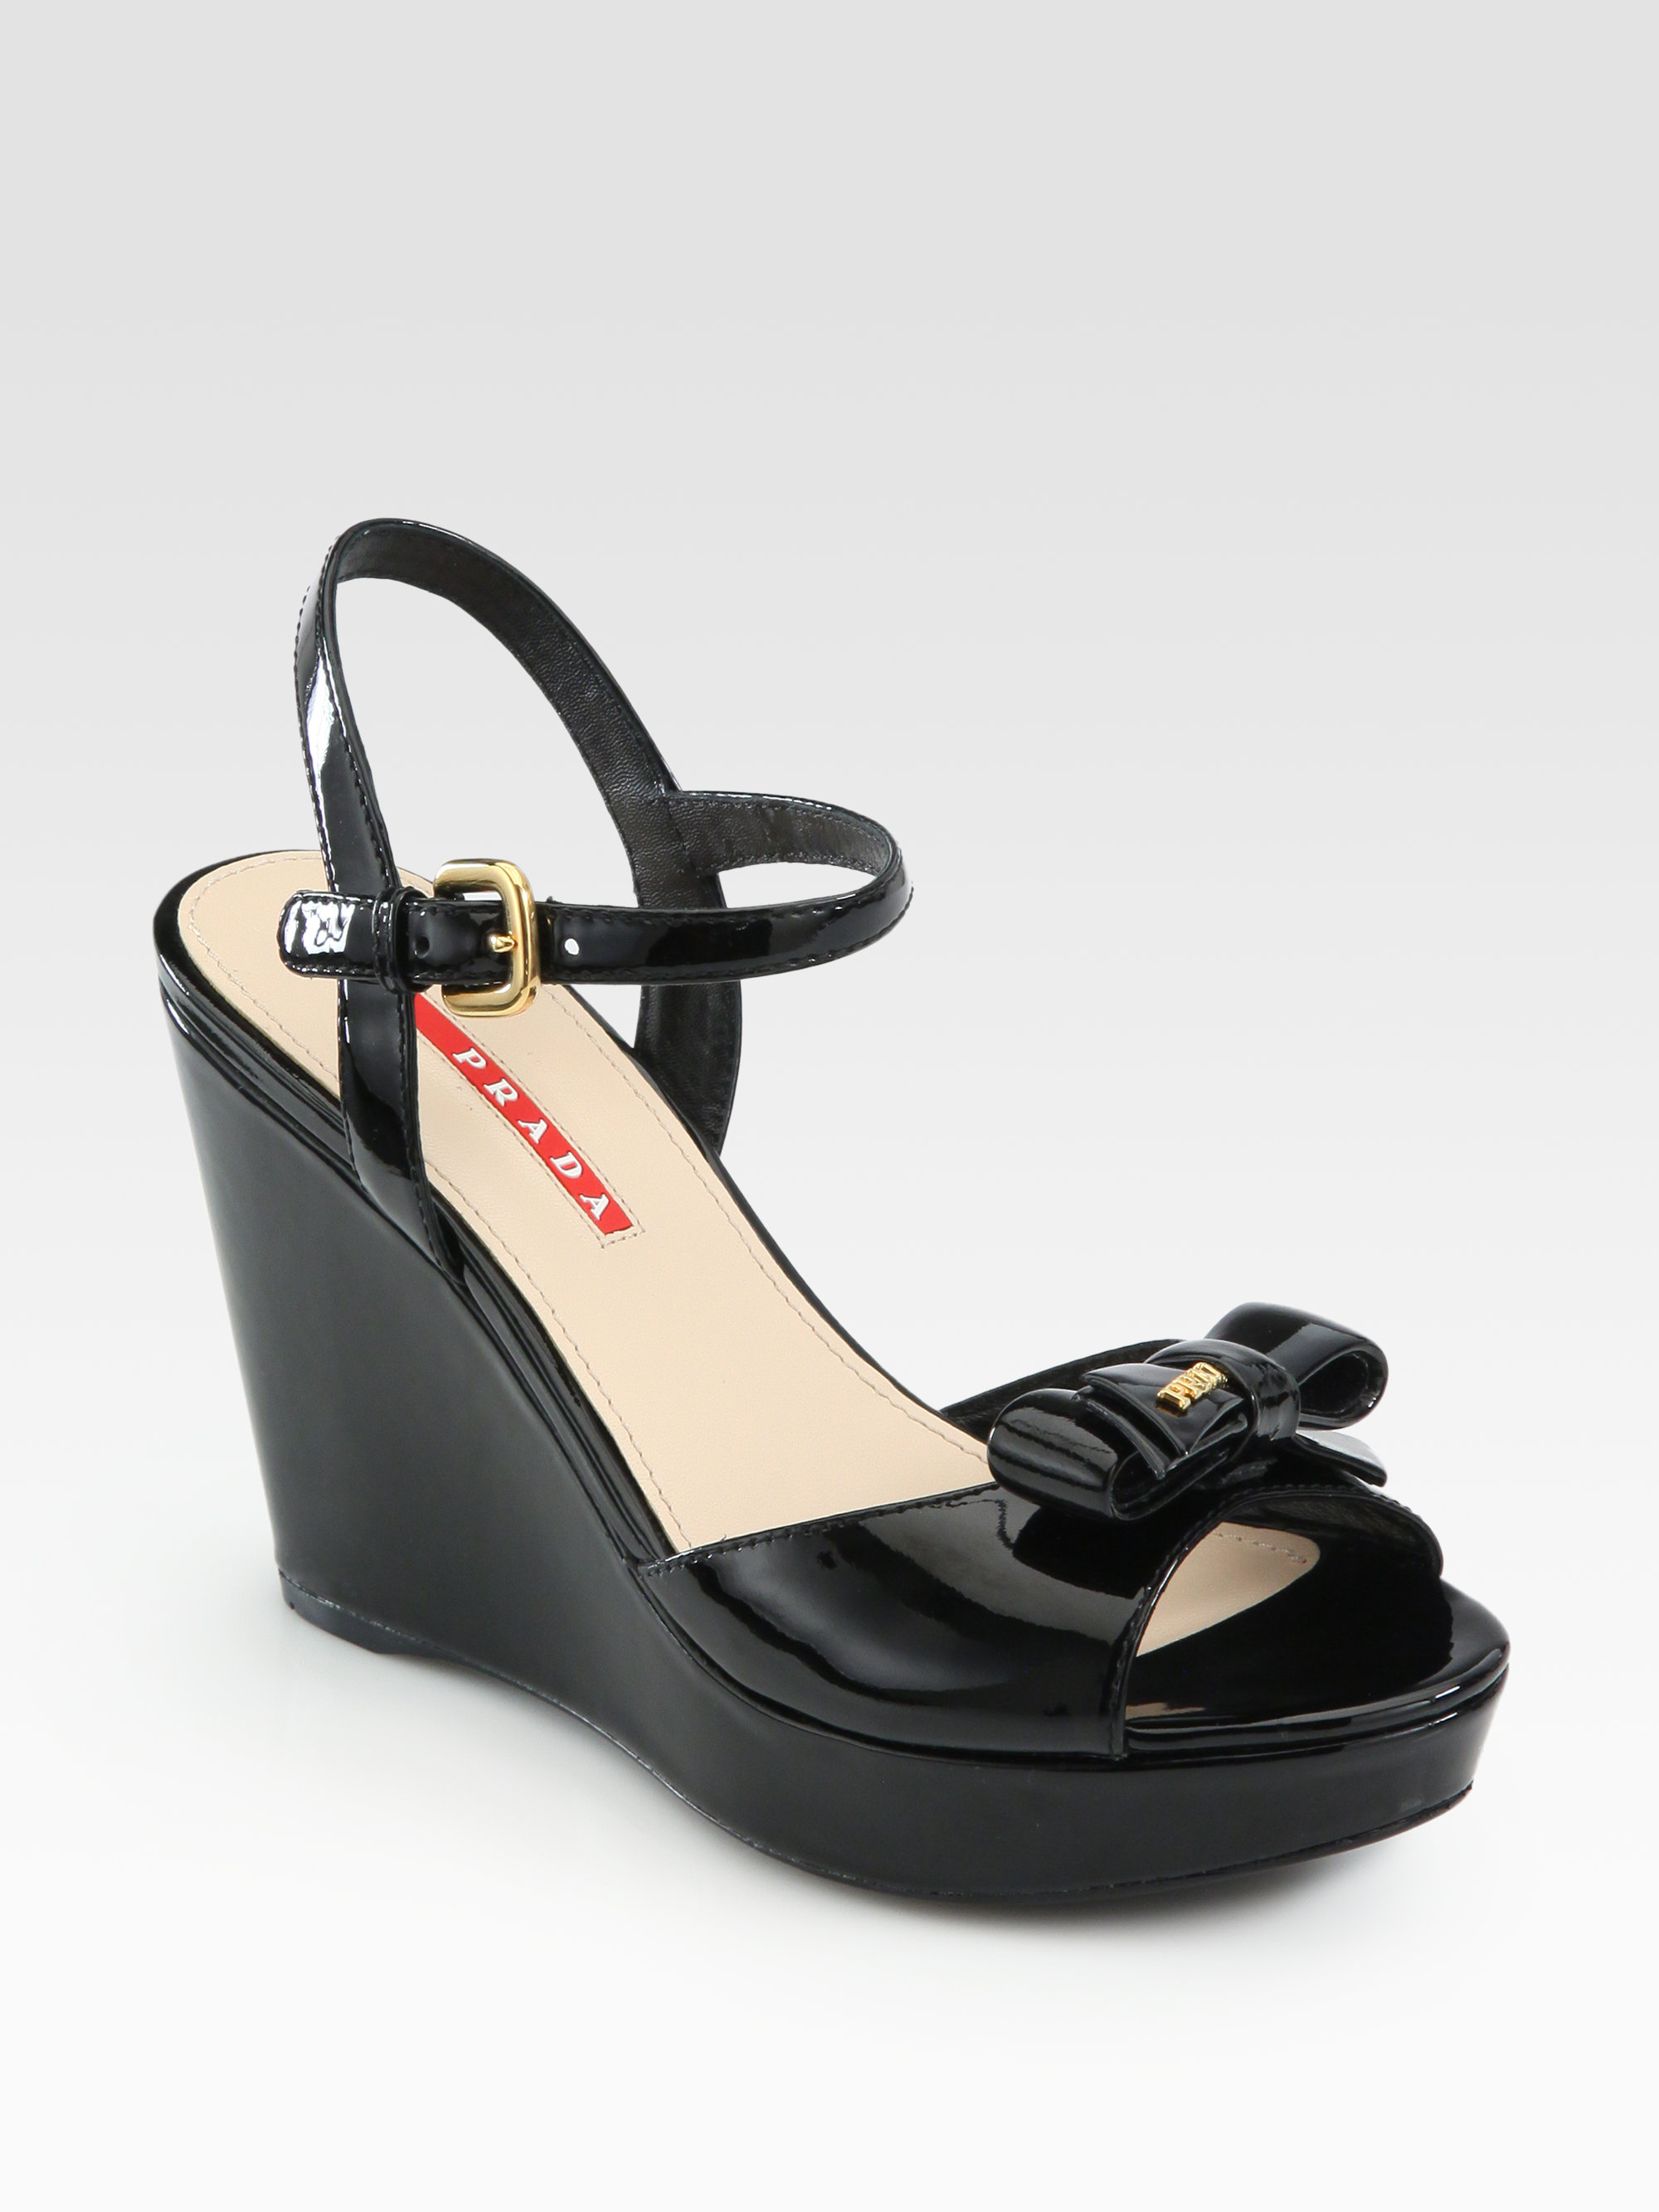 Prada Patent Leather Bow Wedge Sandals in Black | Lyst